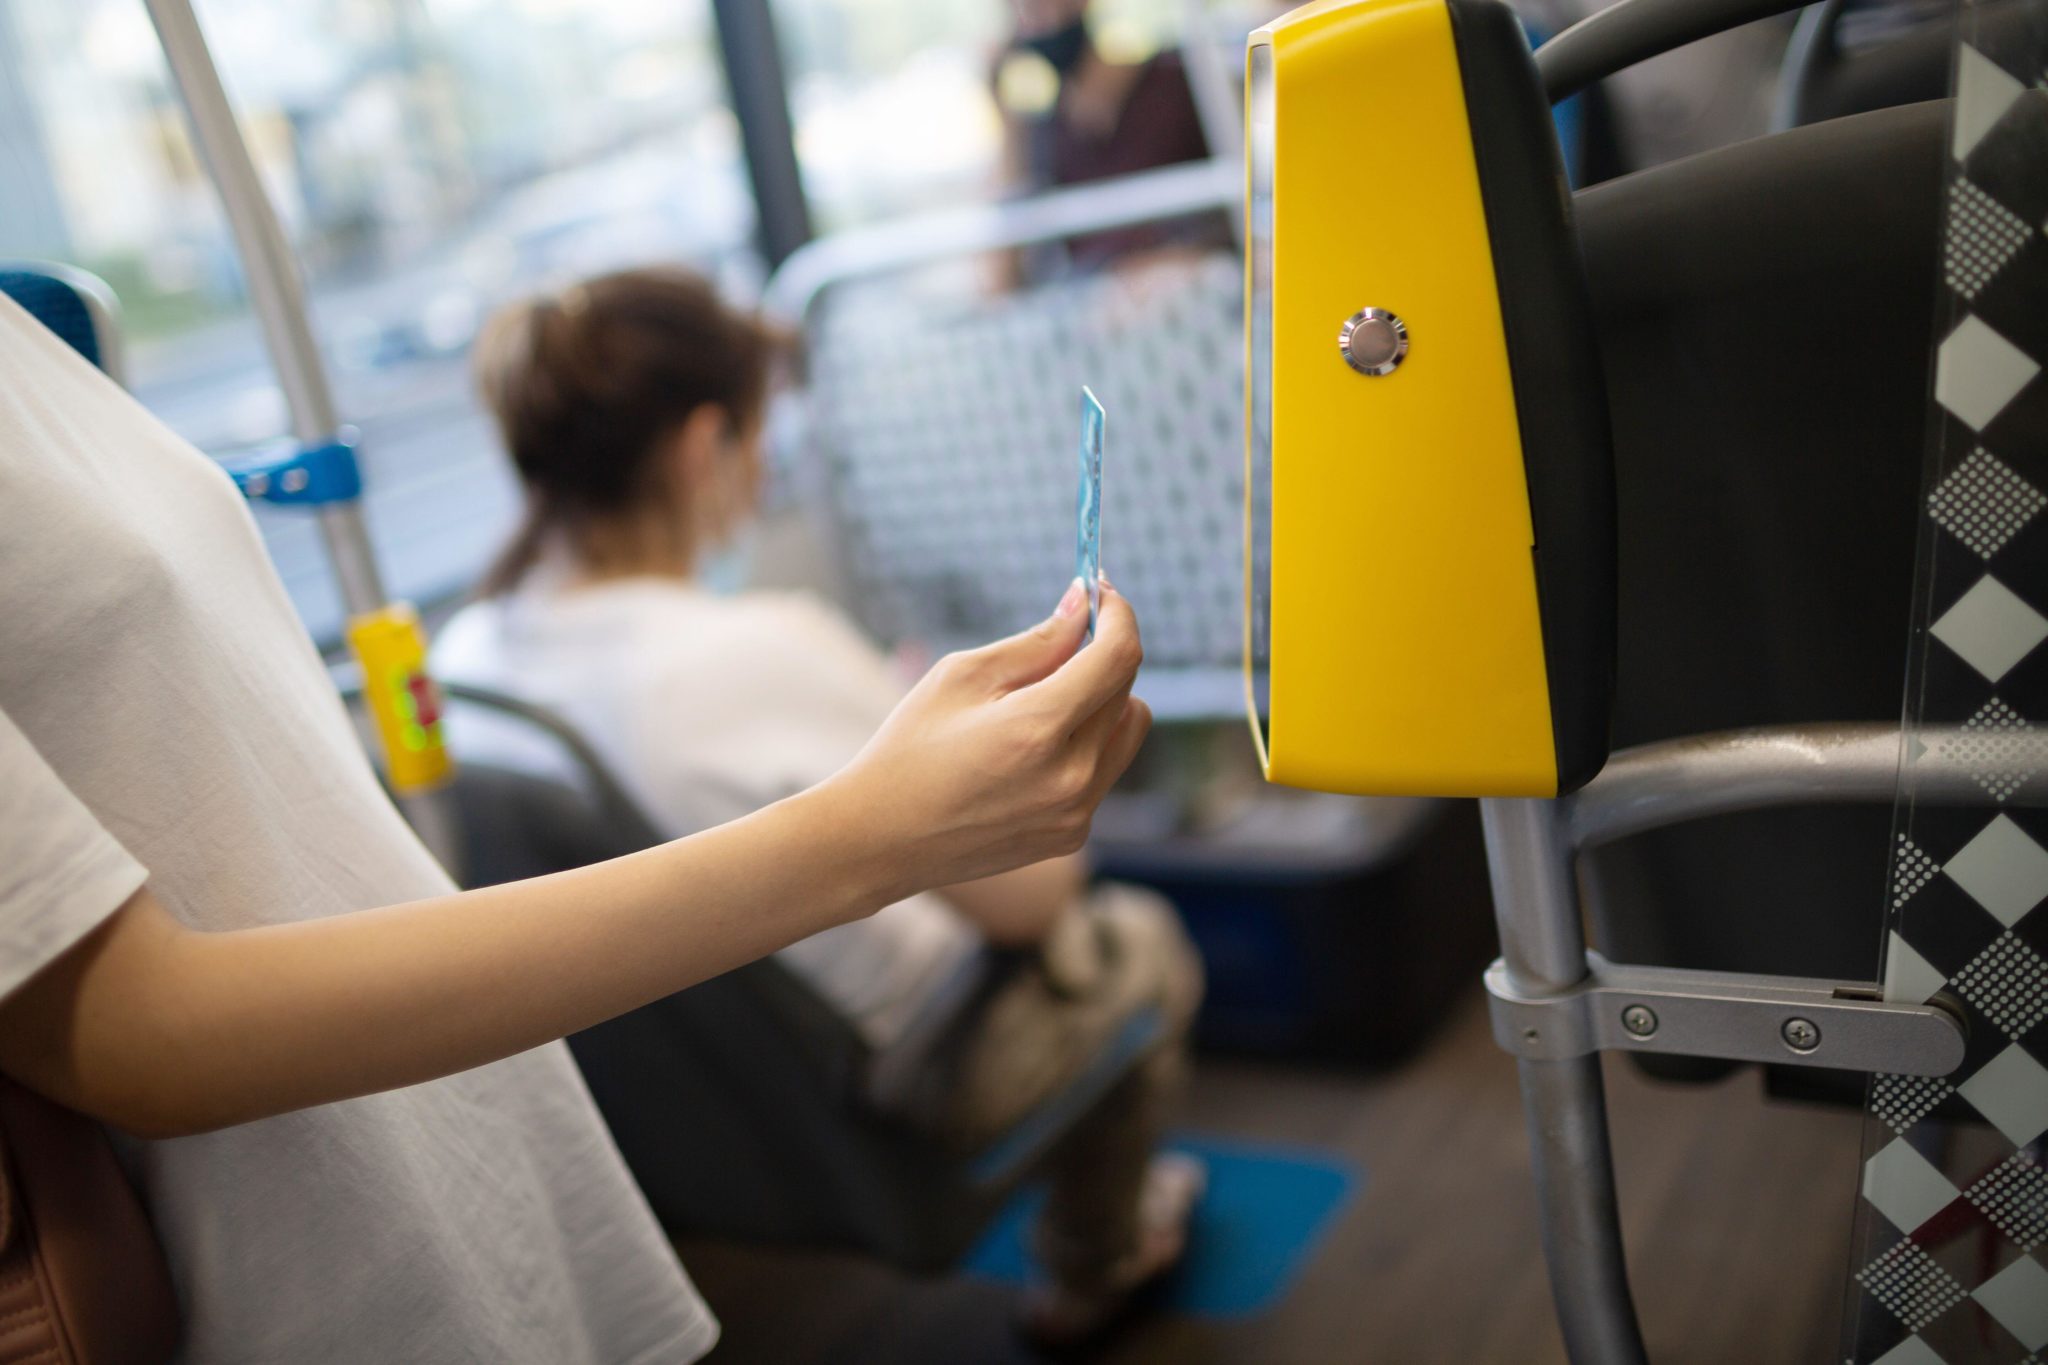 A woman paying for public transport through contactless. Image: Zoonar GmbH / Alamy Stock Photo